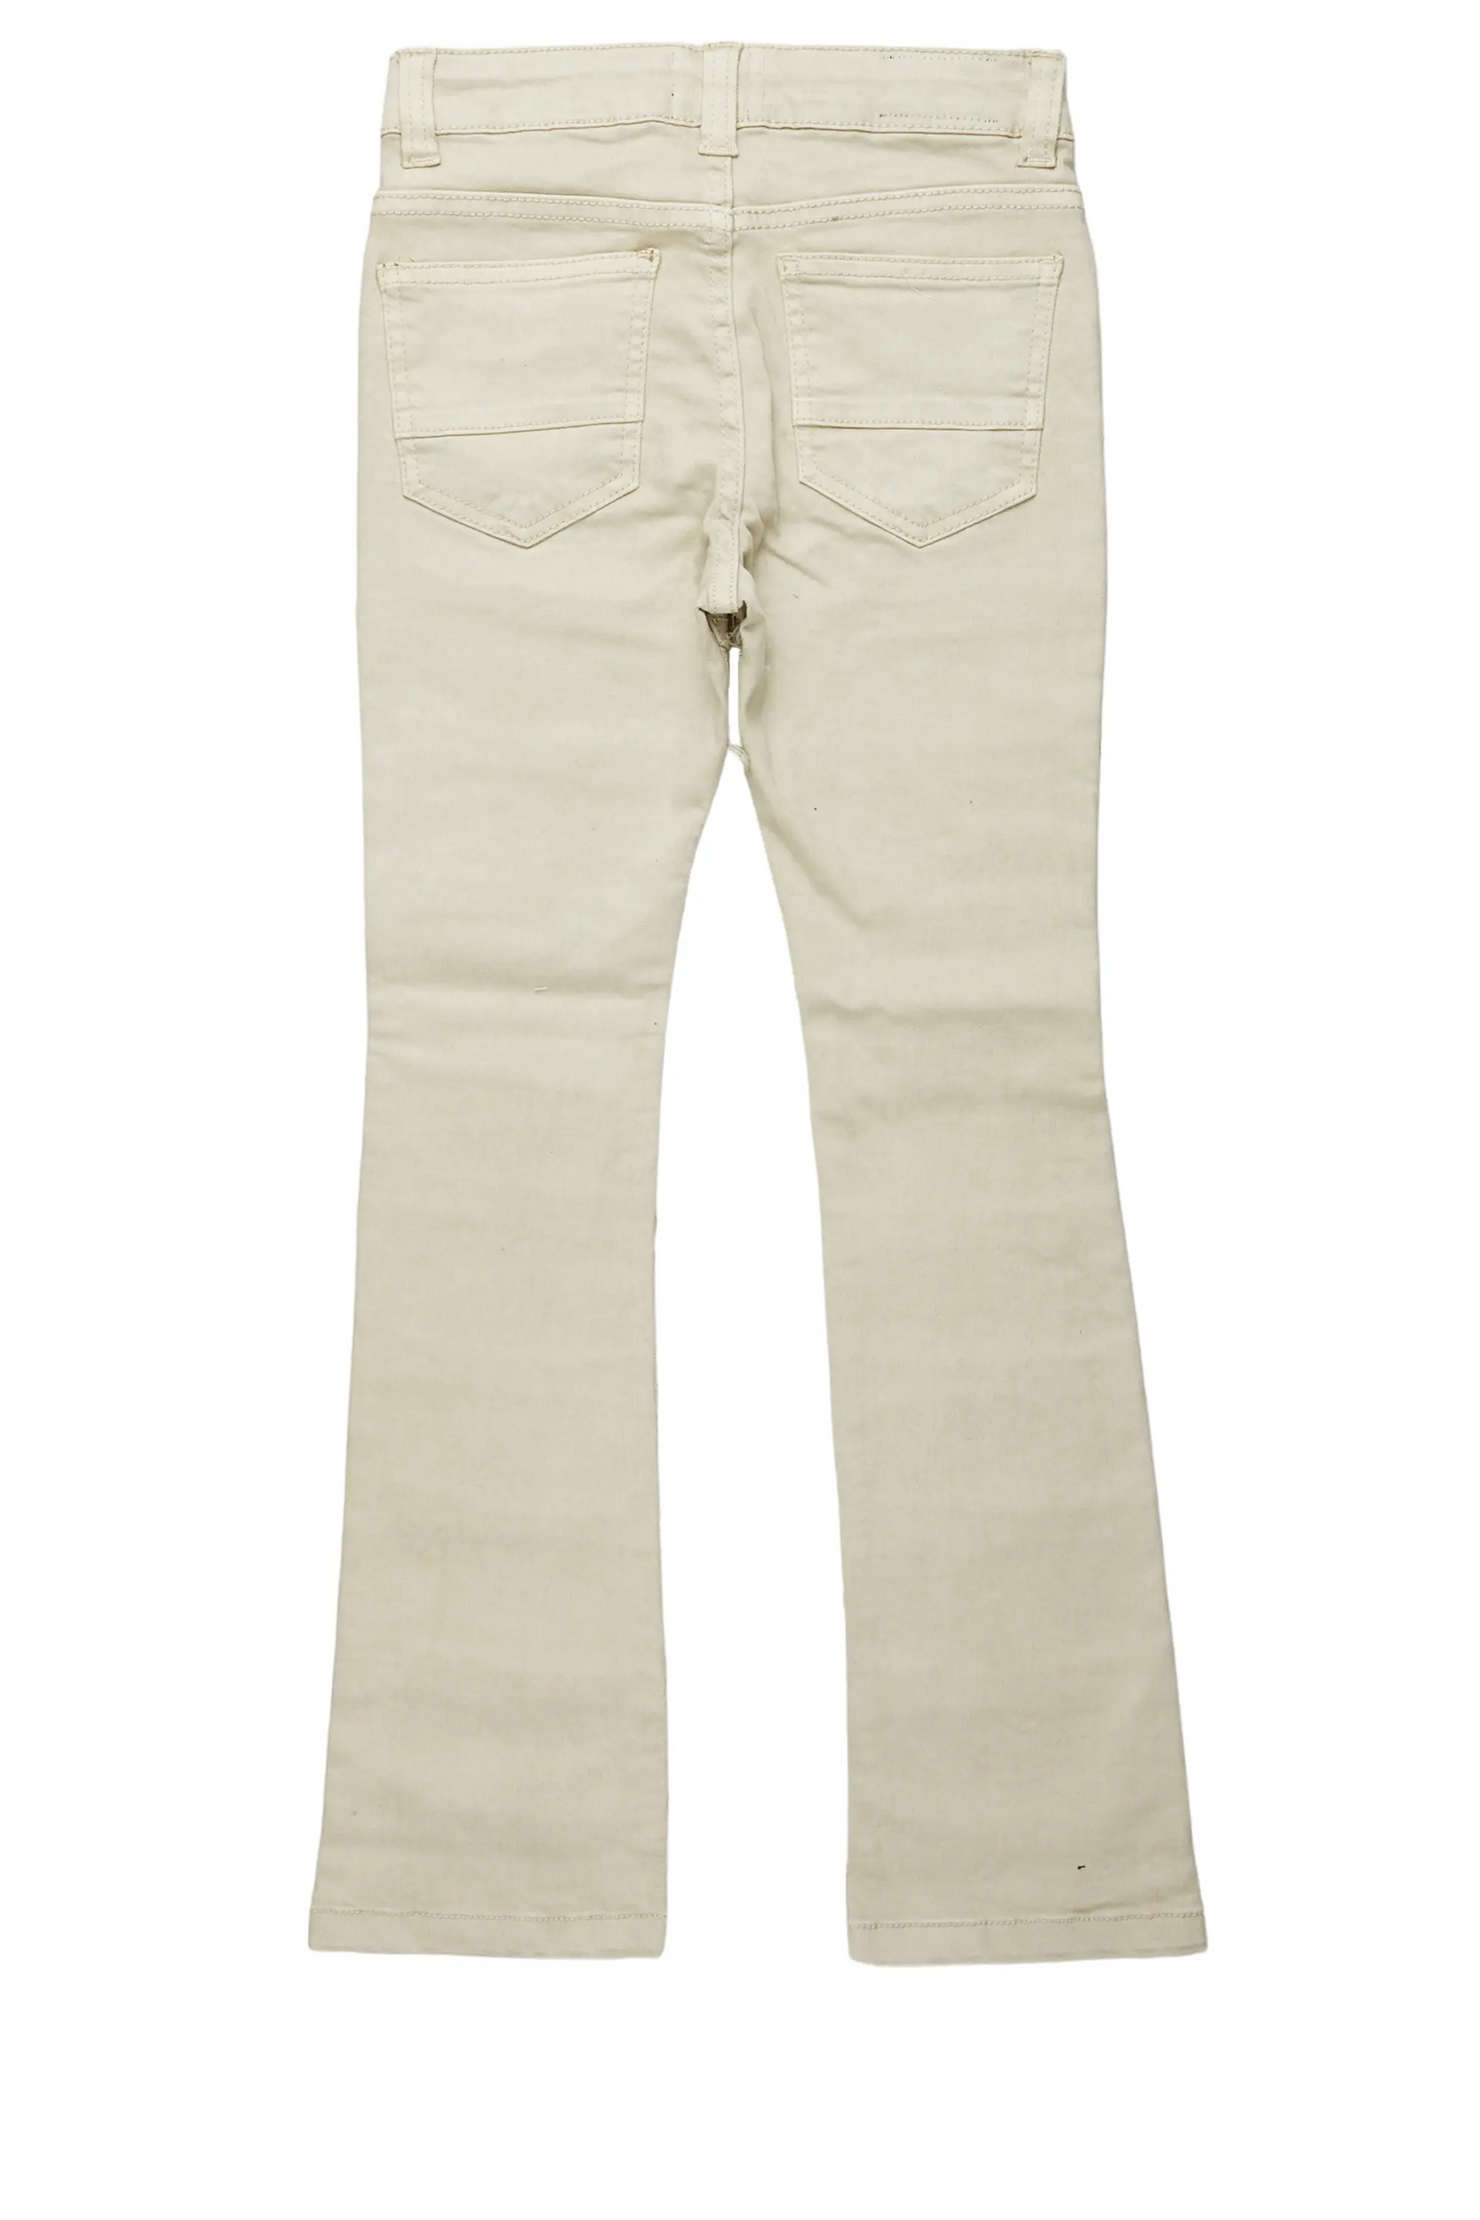 Boys Cullen Beige Frayed Stacked Flare Jean